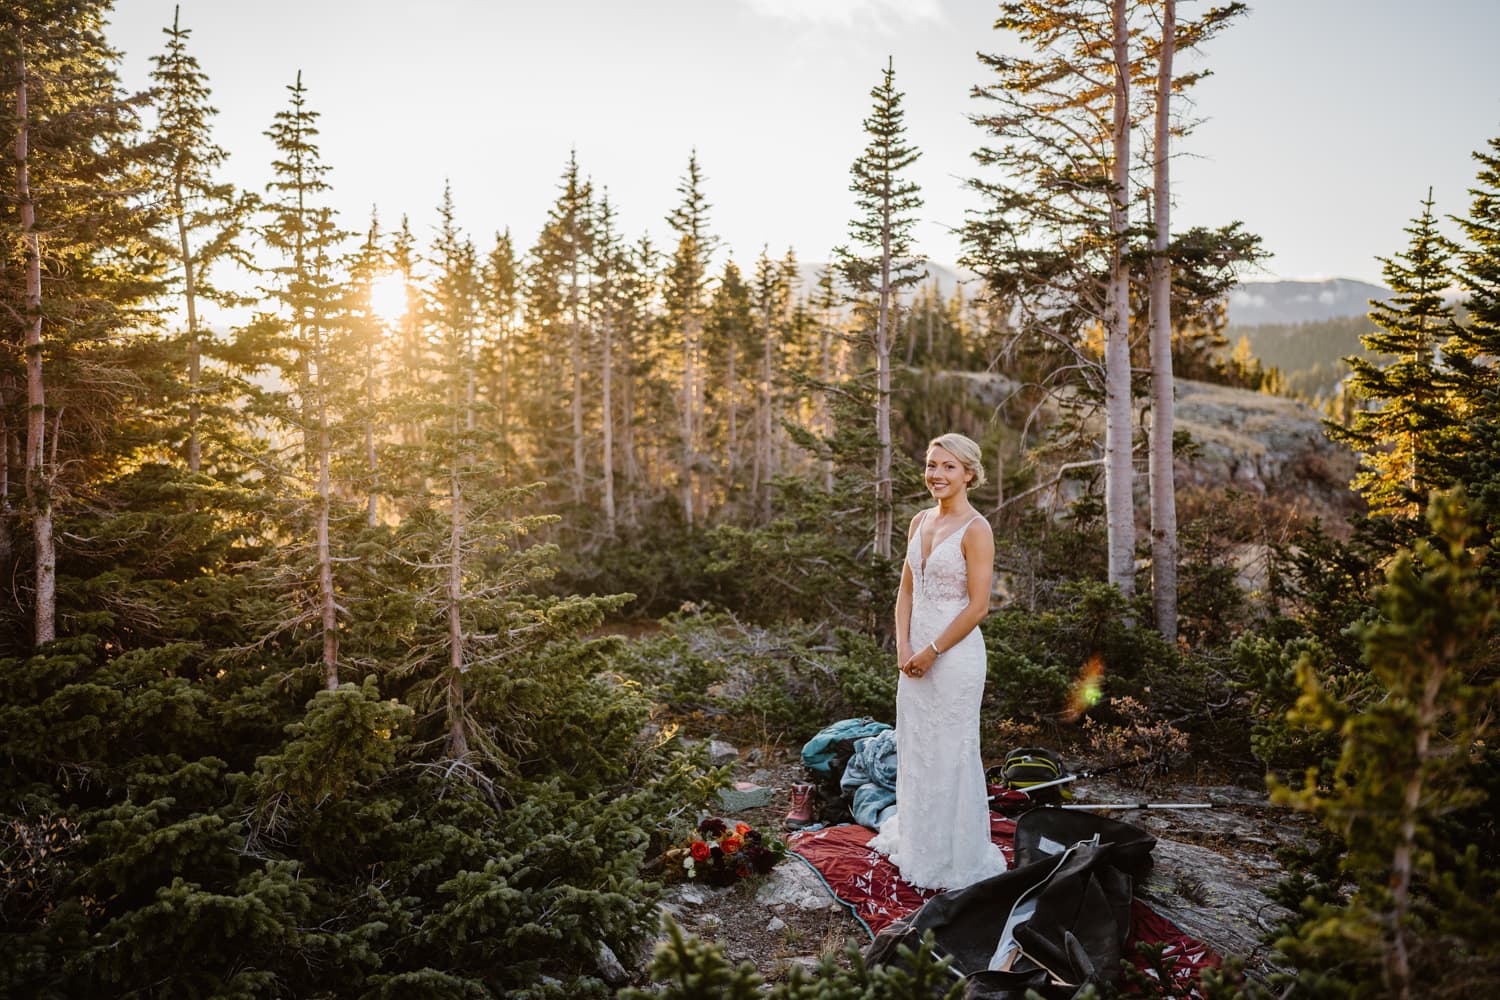 Kelsey getting ready for their Breckenridge elopement.